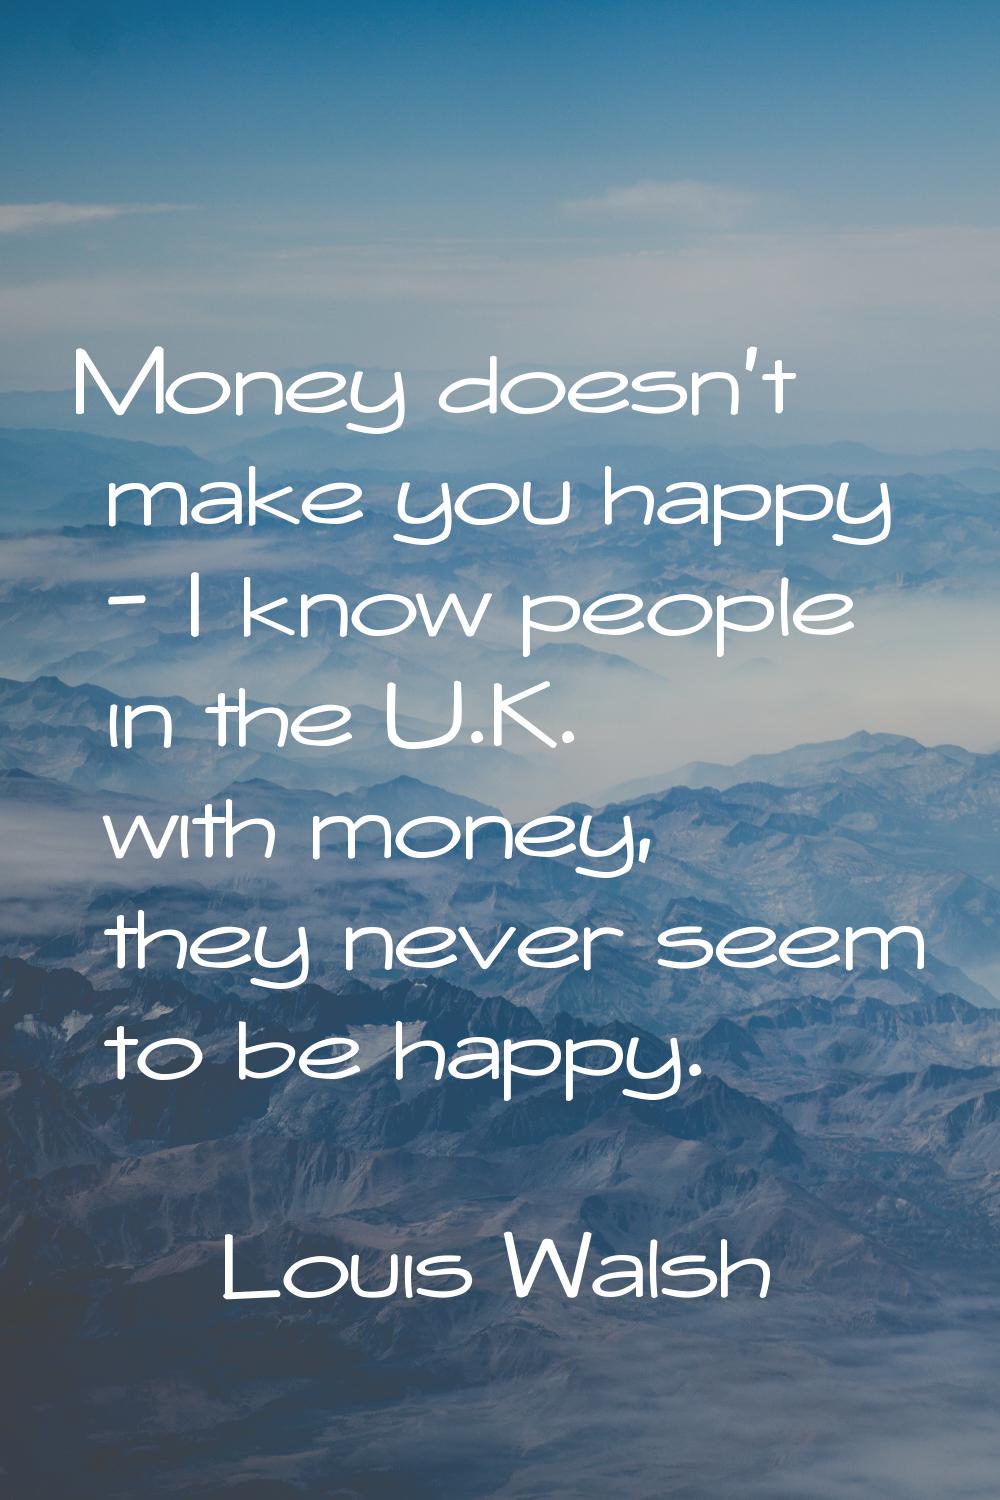 Money doesn't make you happy - I know people in the U.K. with money, they never seem to be happy.